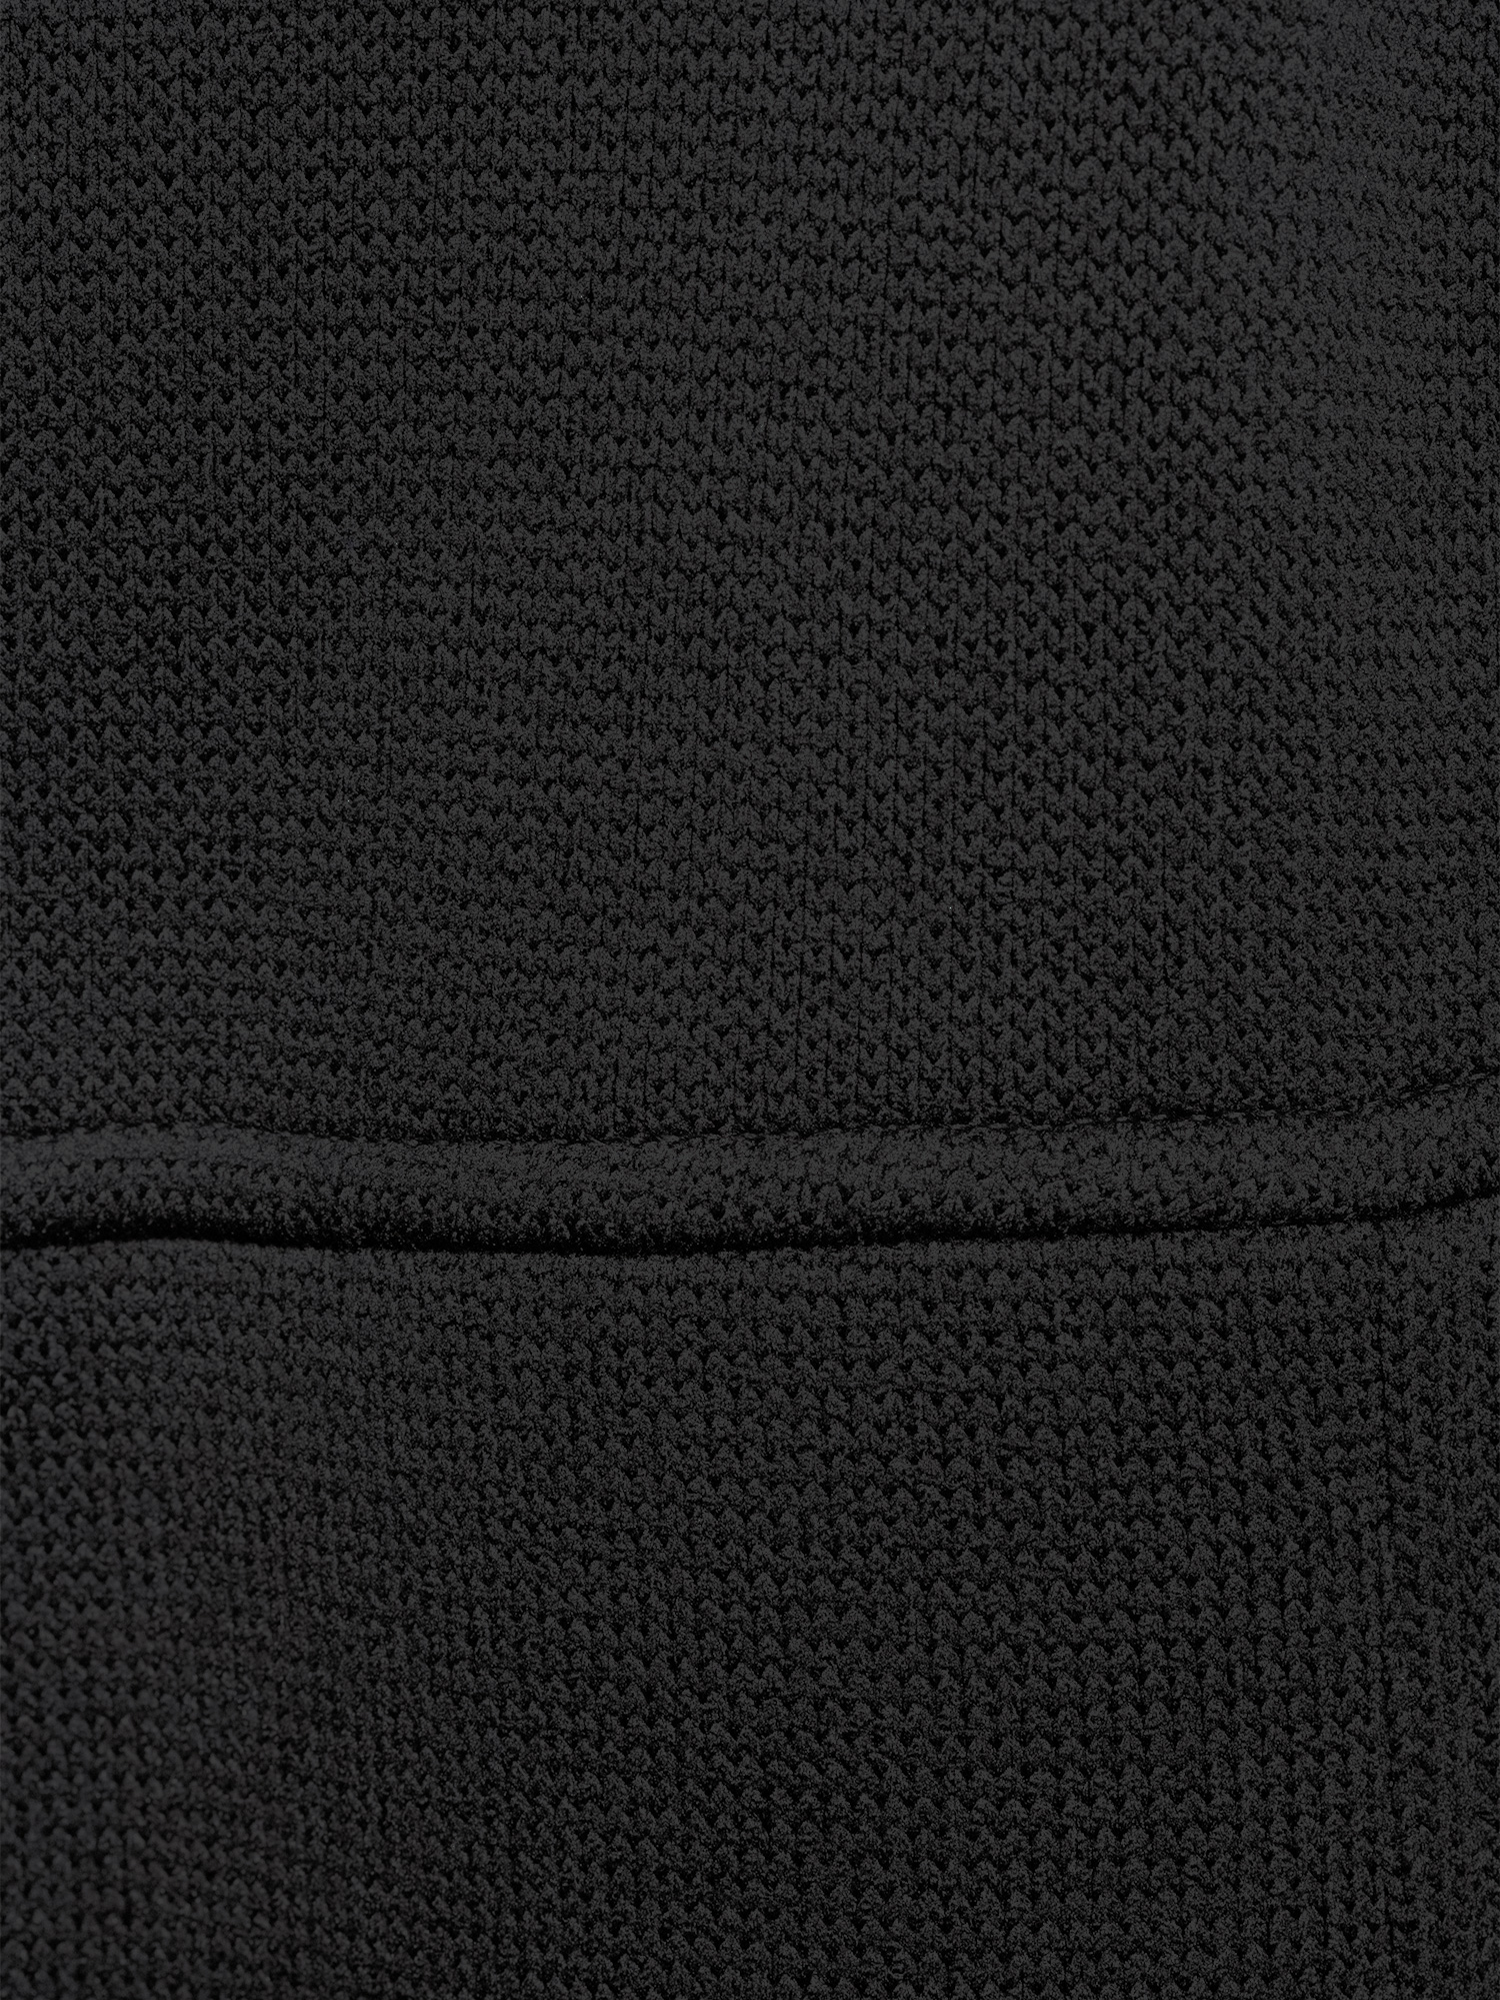 George Men's and Big Men's Sweater Fleece, up to Size 5XL - image 5 of 6